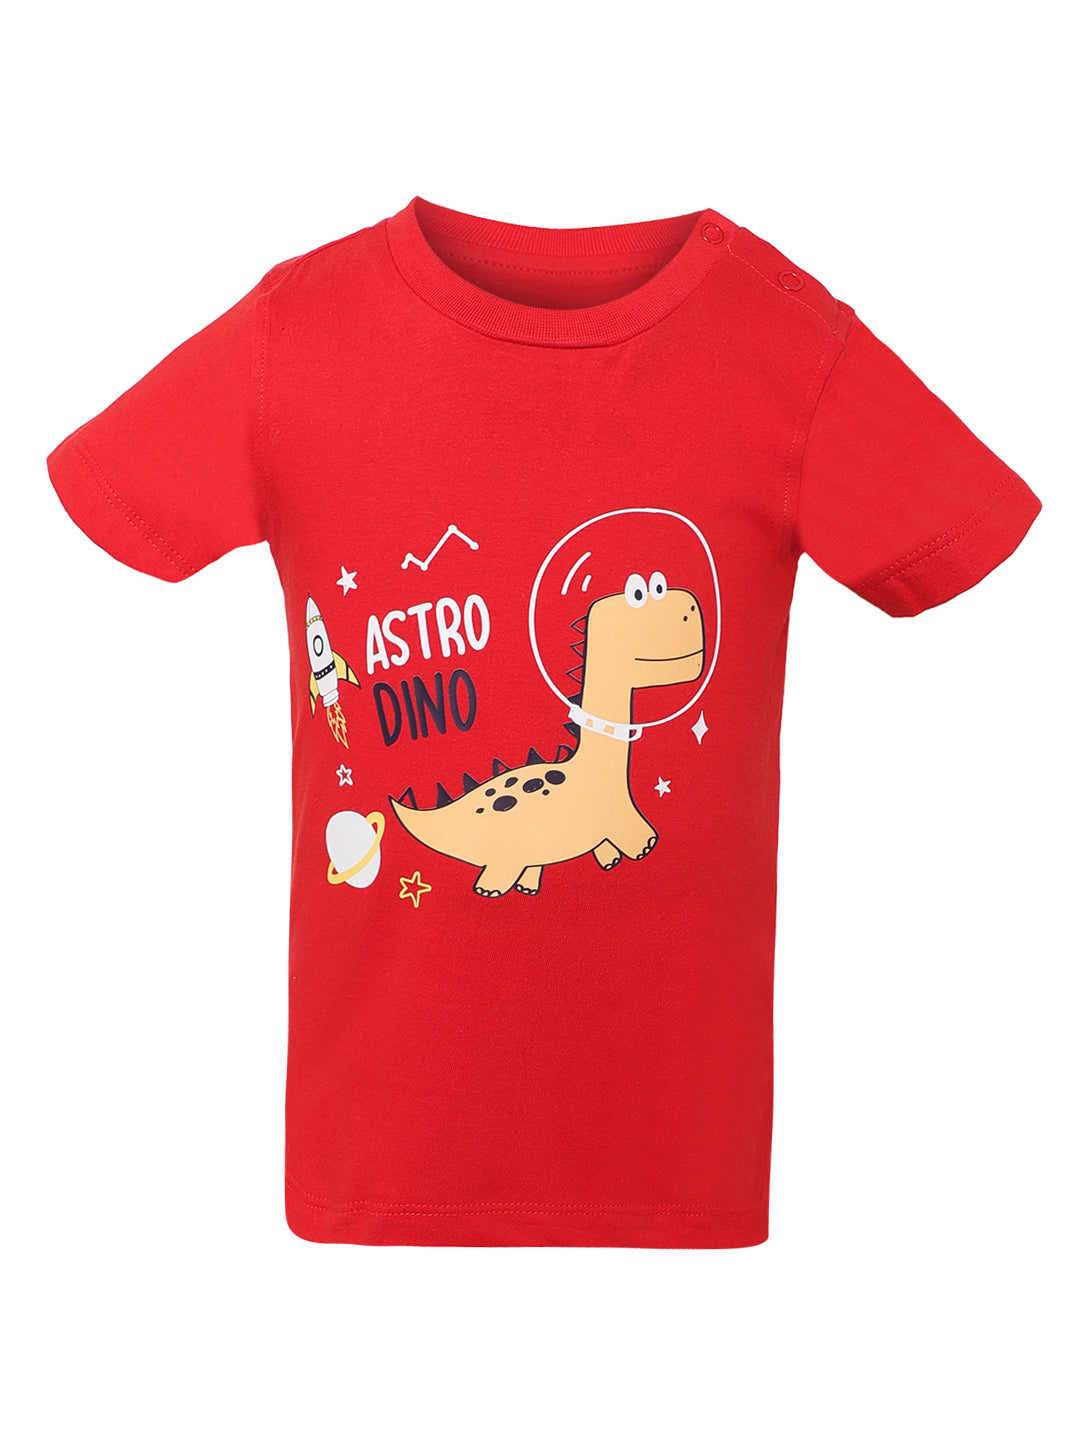 Giggles & Wiggles Boys Red Space Dino Round-Neck Printed Half Sleeves T-Shirts